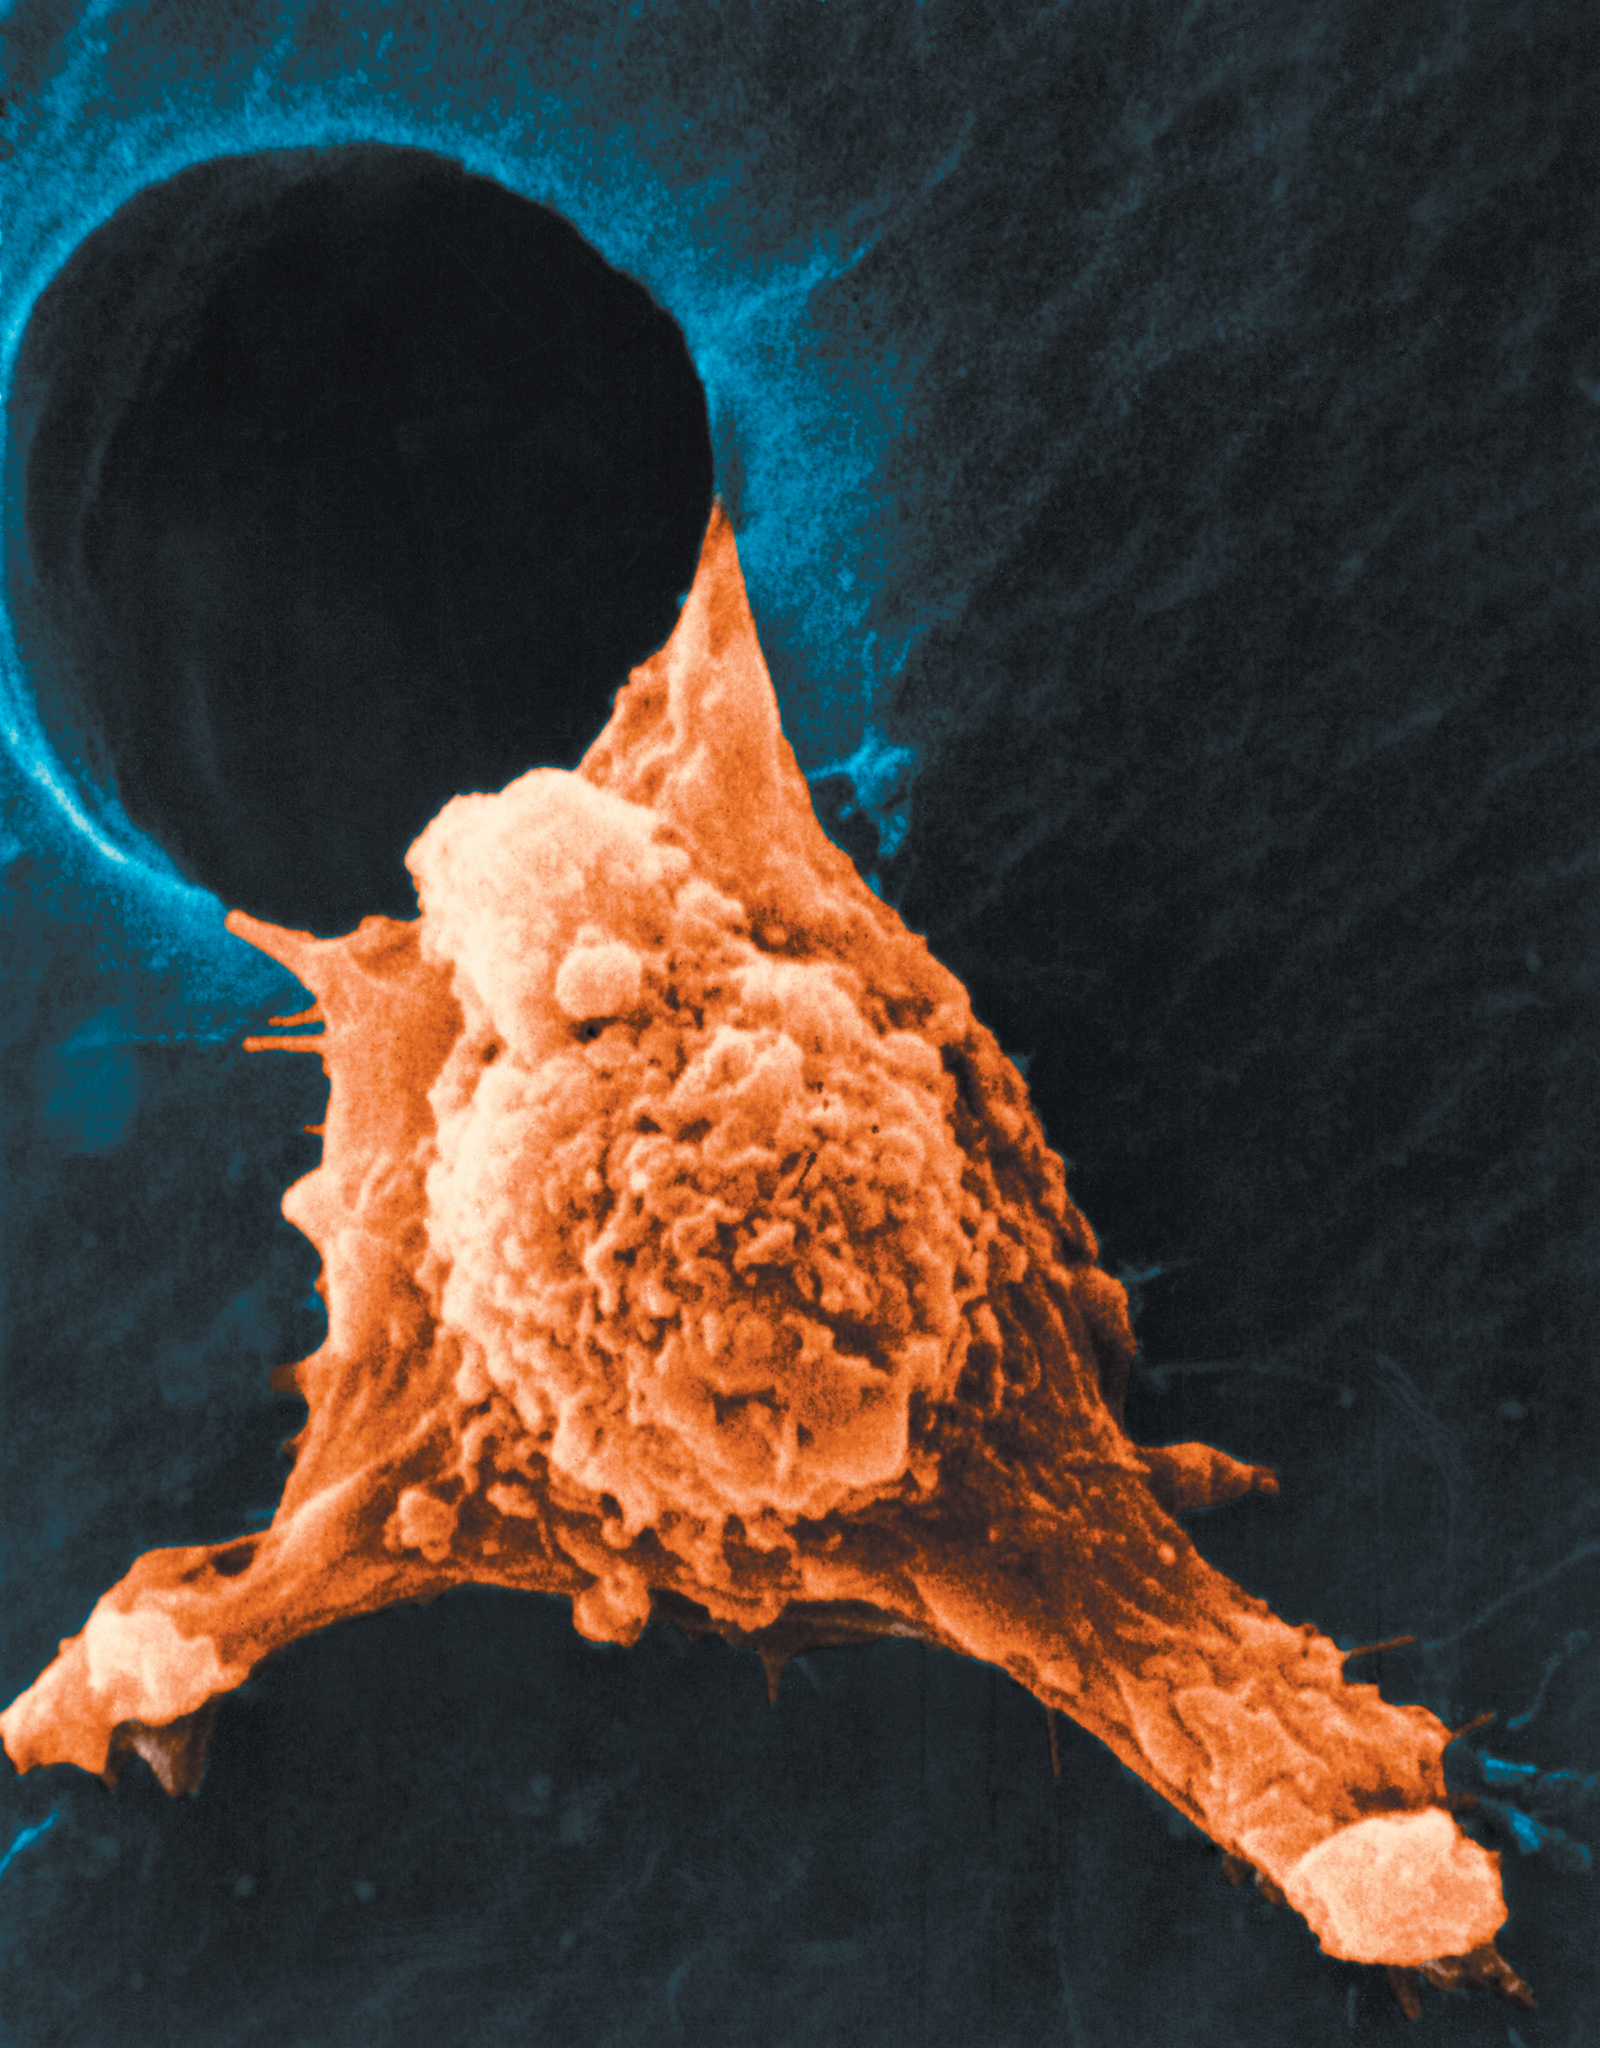 A color-enhanced scanning electron micrograph showing the spread of cancer cells